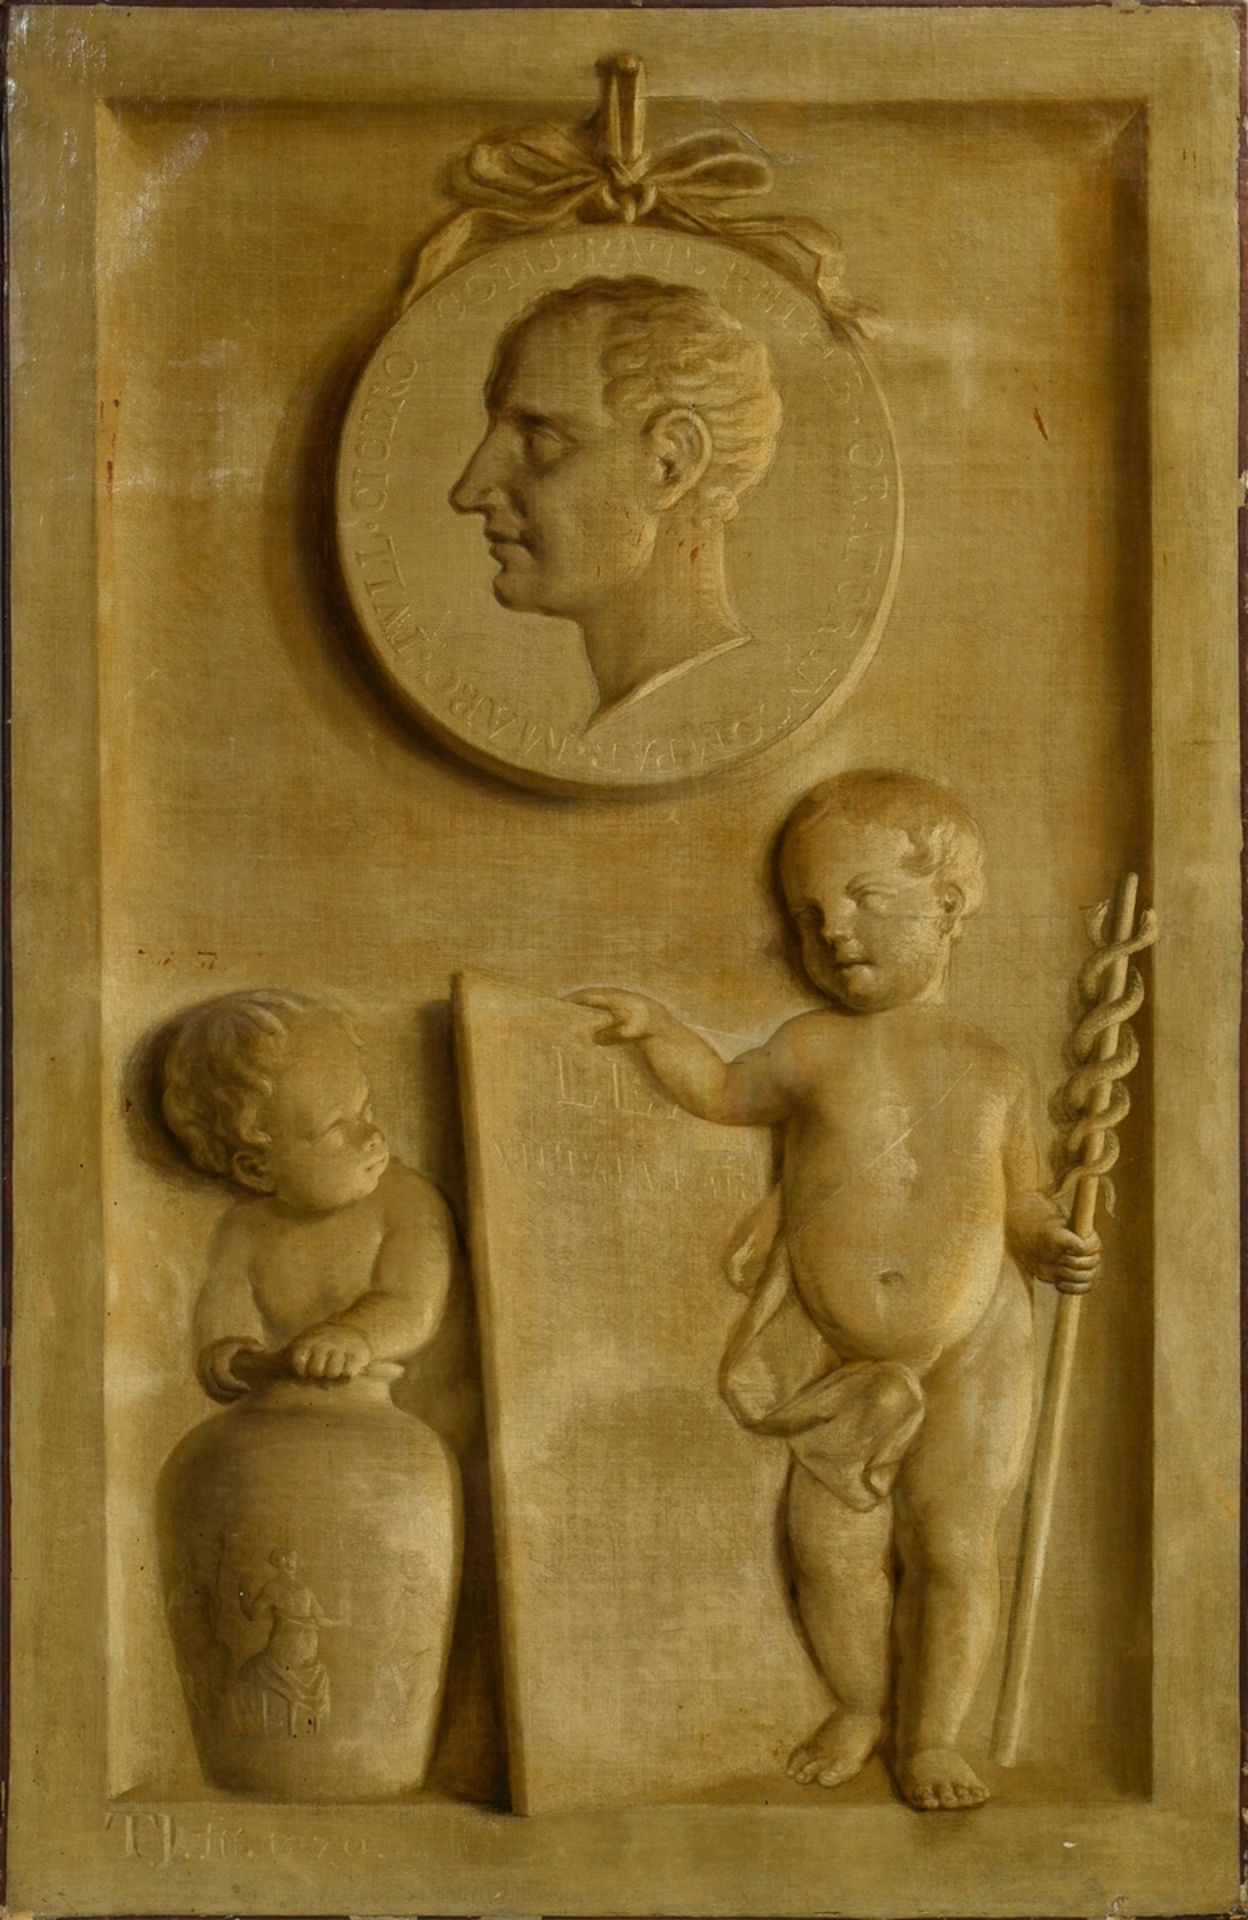 Unknown artist of the 18th c. "Portrait medallion of Cicero and two putti in relief